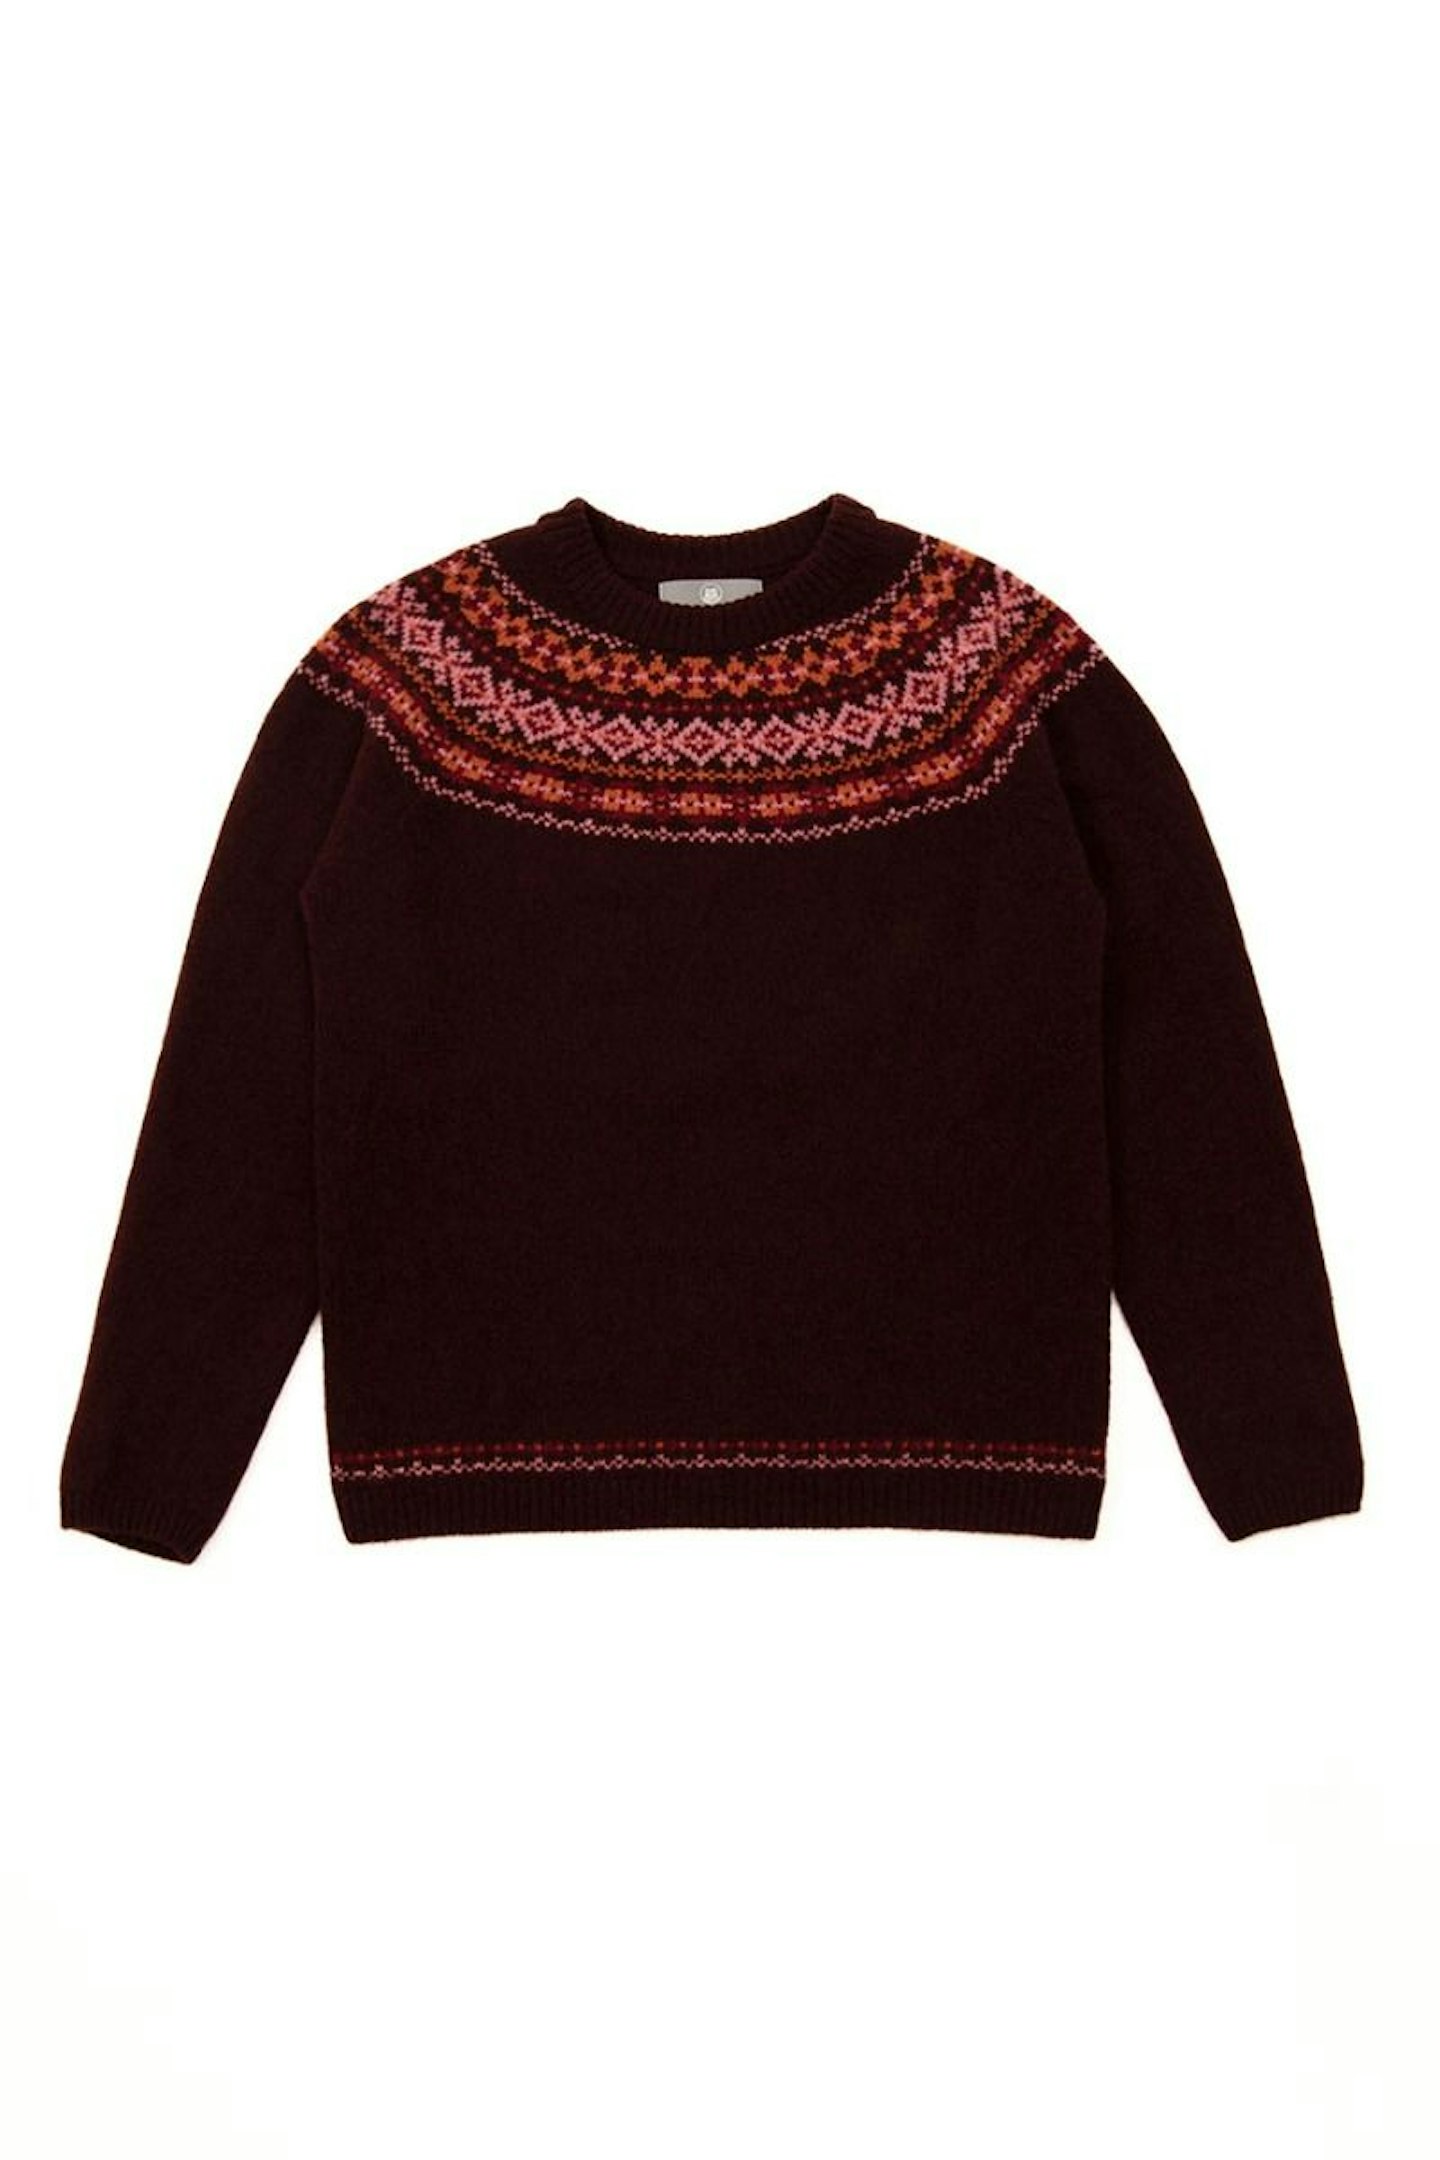 The Croft House Jumper